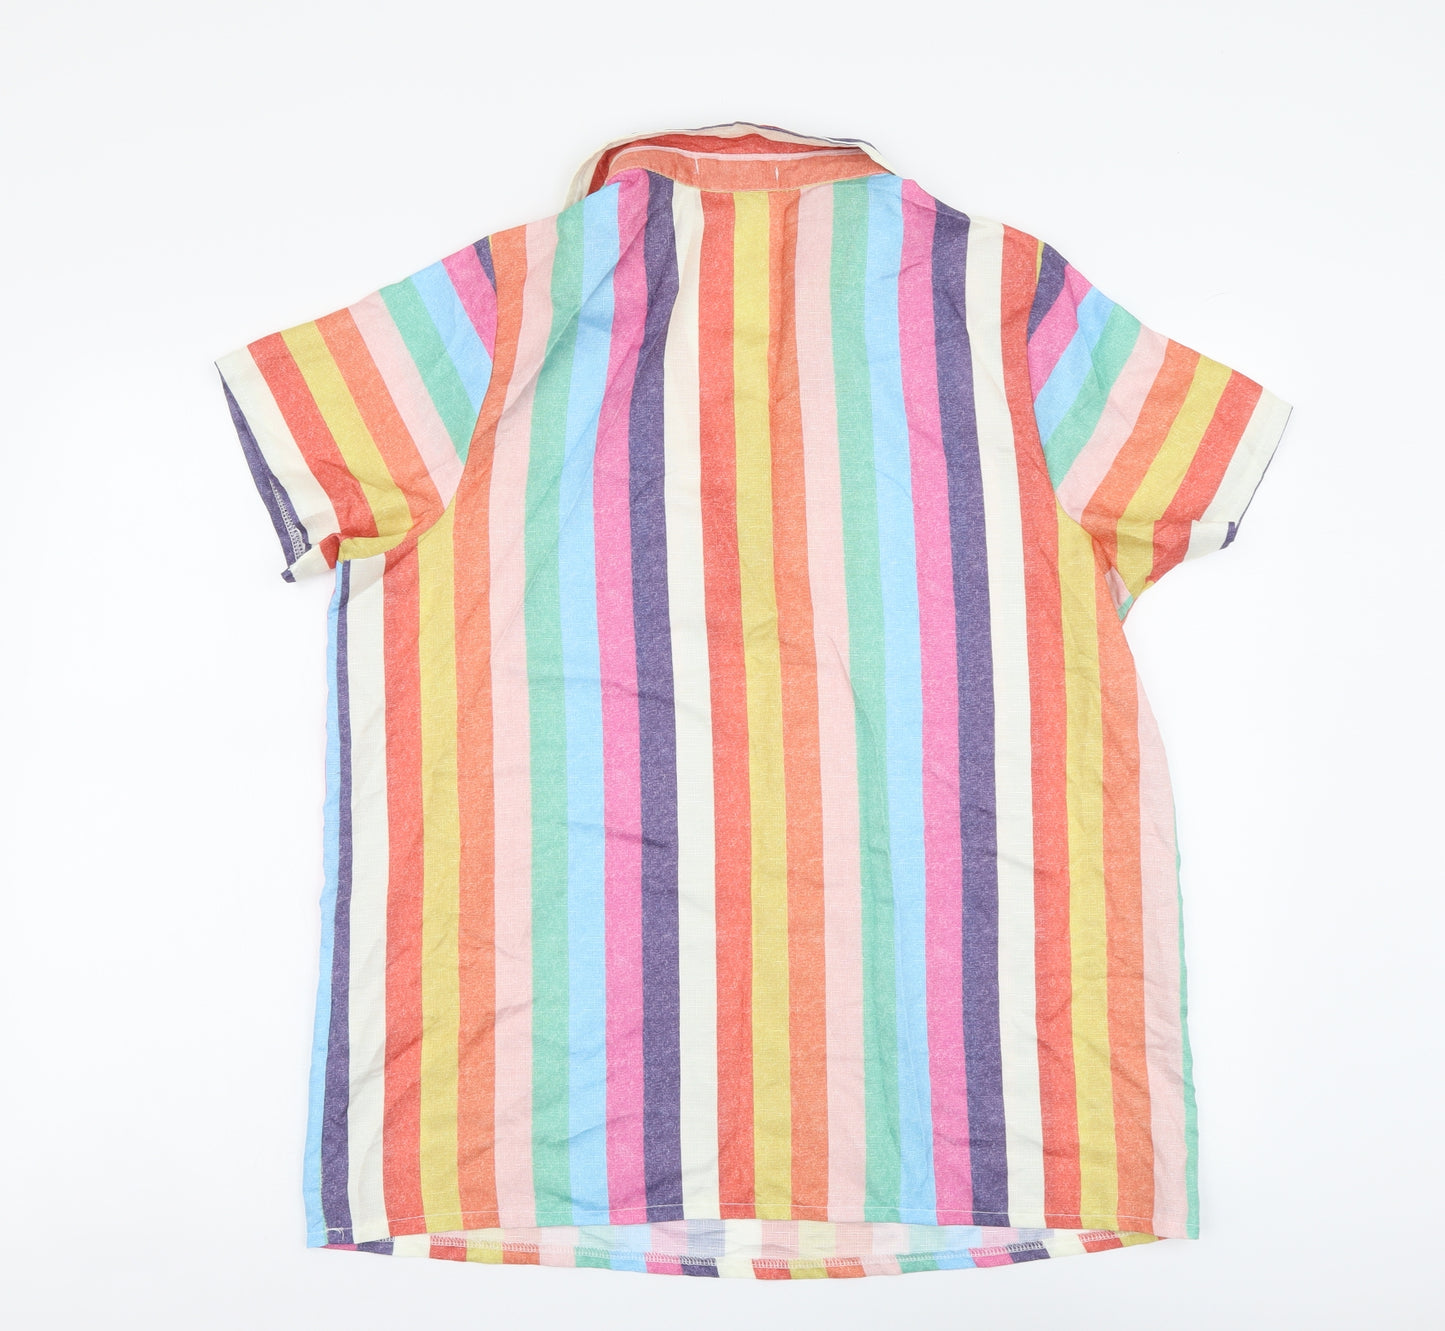 MissLook Womens Multicoloured Striped Cotton Basic Blouse Size XL Collared